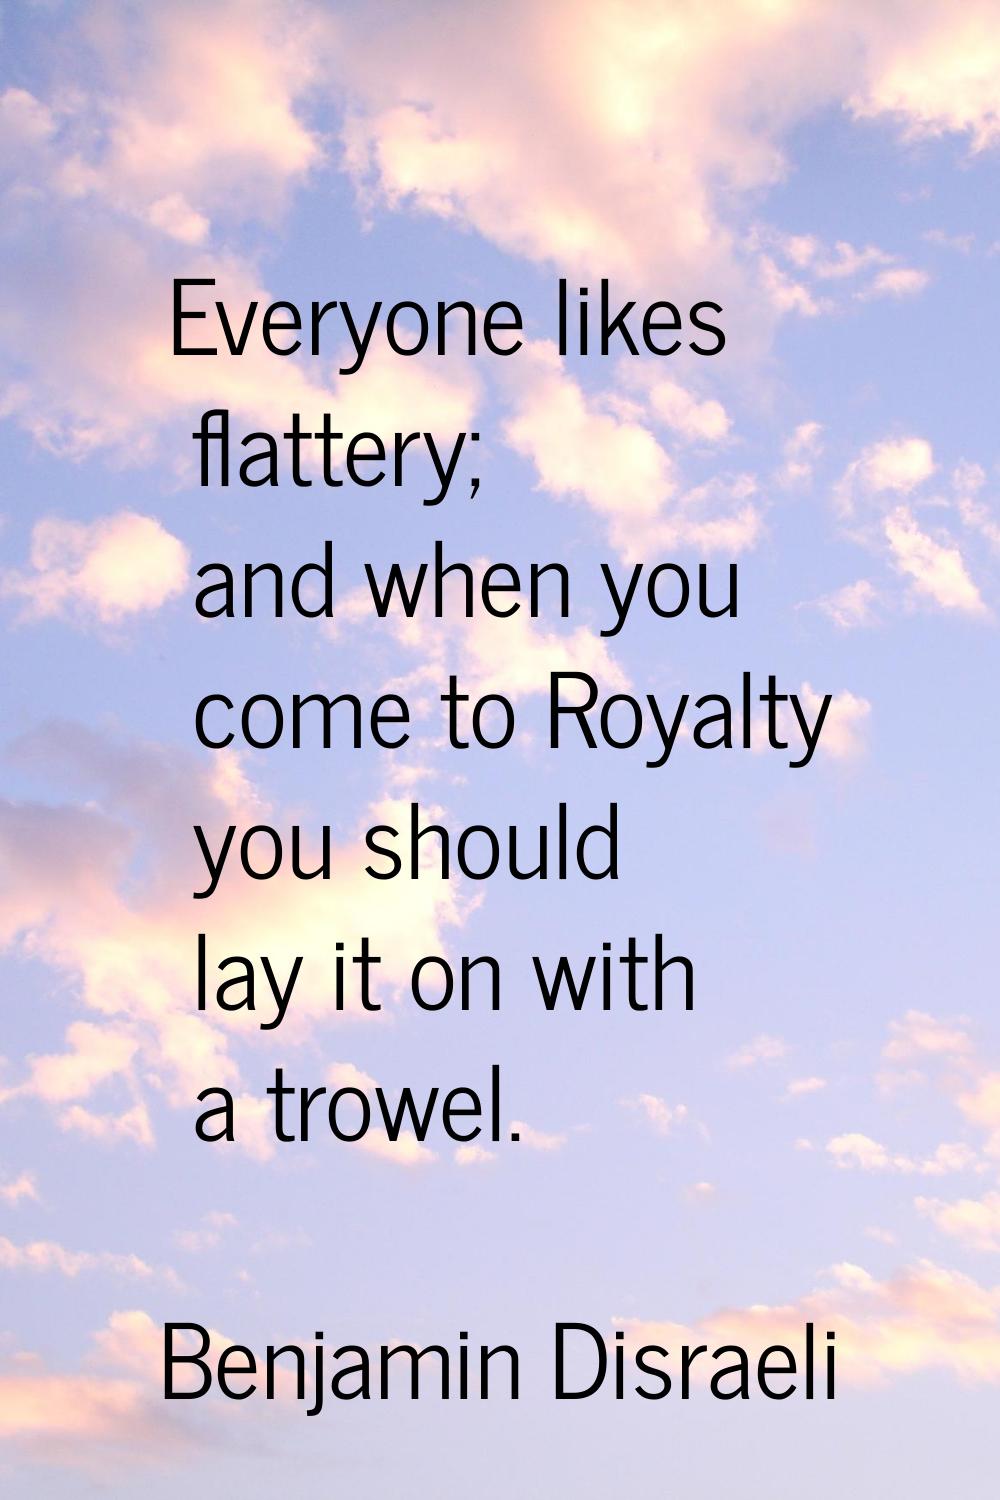 Everyone likes flattery; and when you come to Royalty you should lay it on with a trowel.